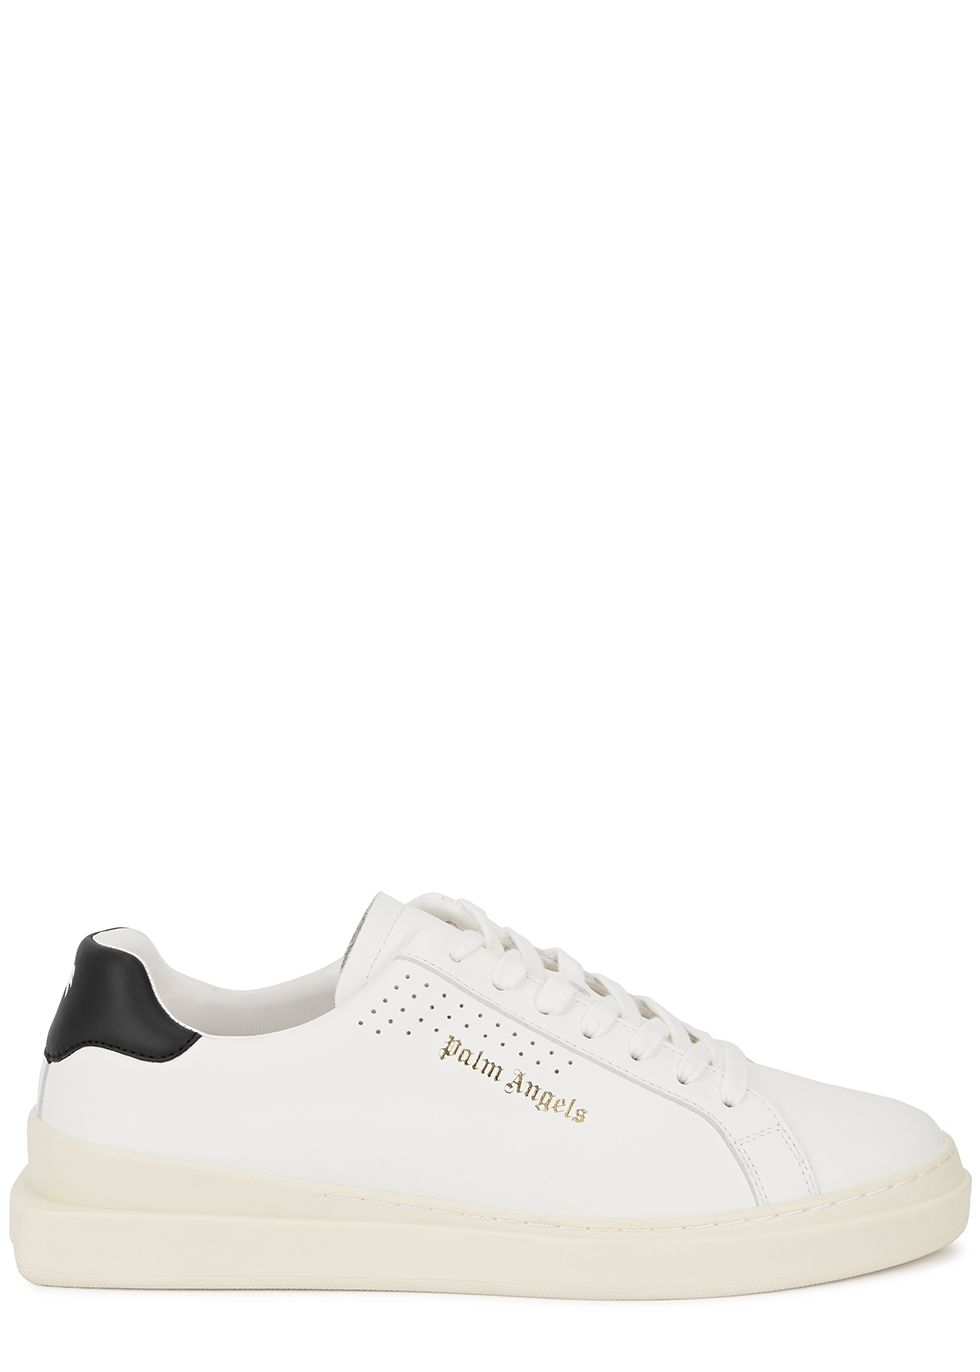 Palm Two white leather sneakers